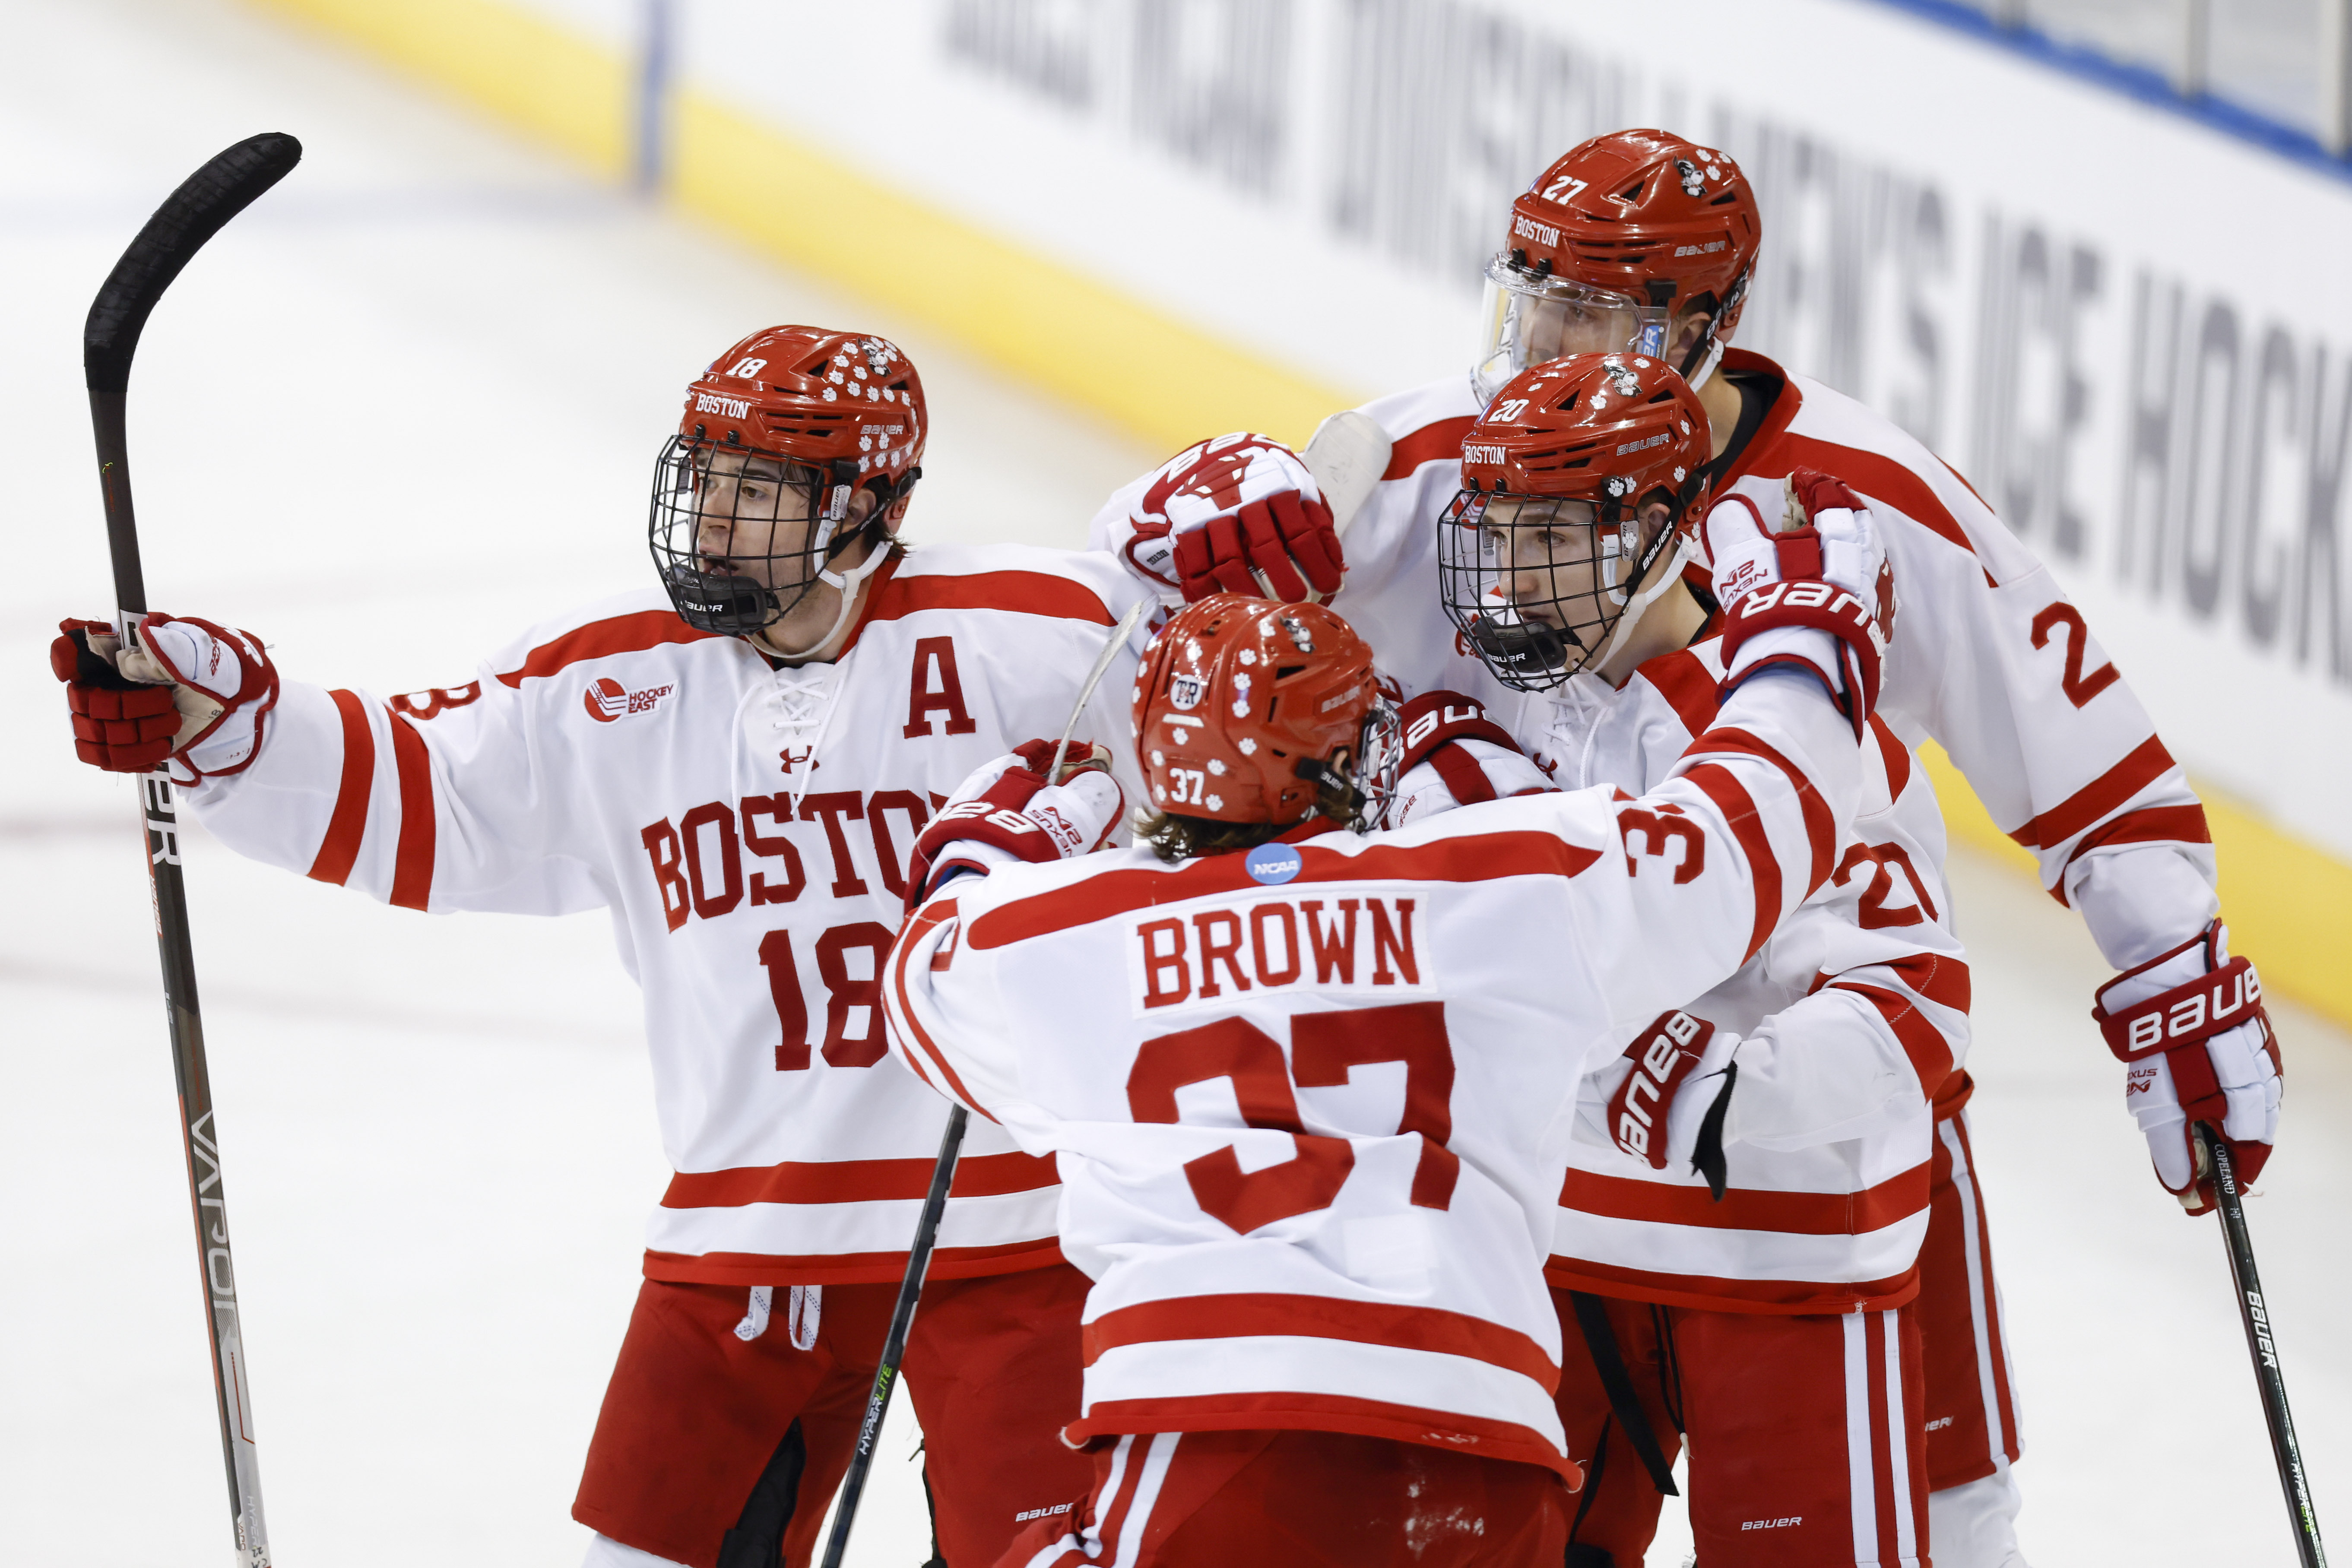 How to Watch the NCAA Mens Hockey Tournament today - March 25 Cornell vs. Boston U, St